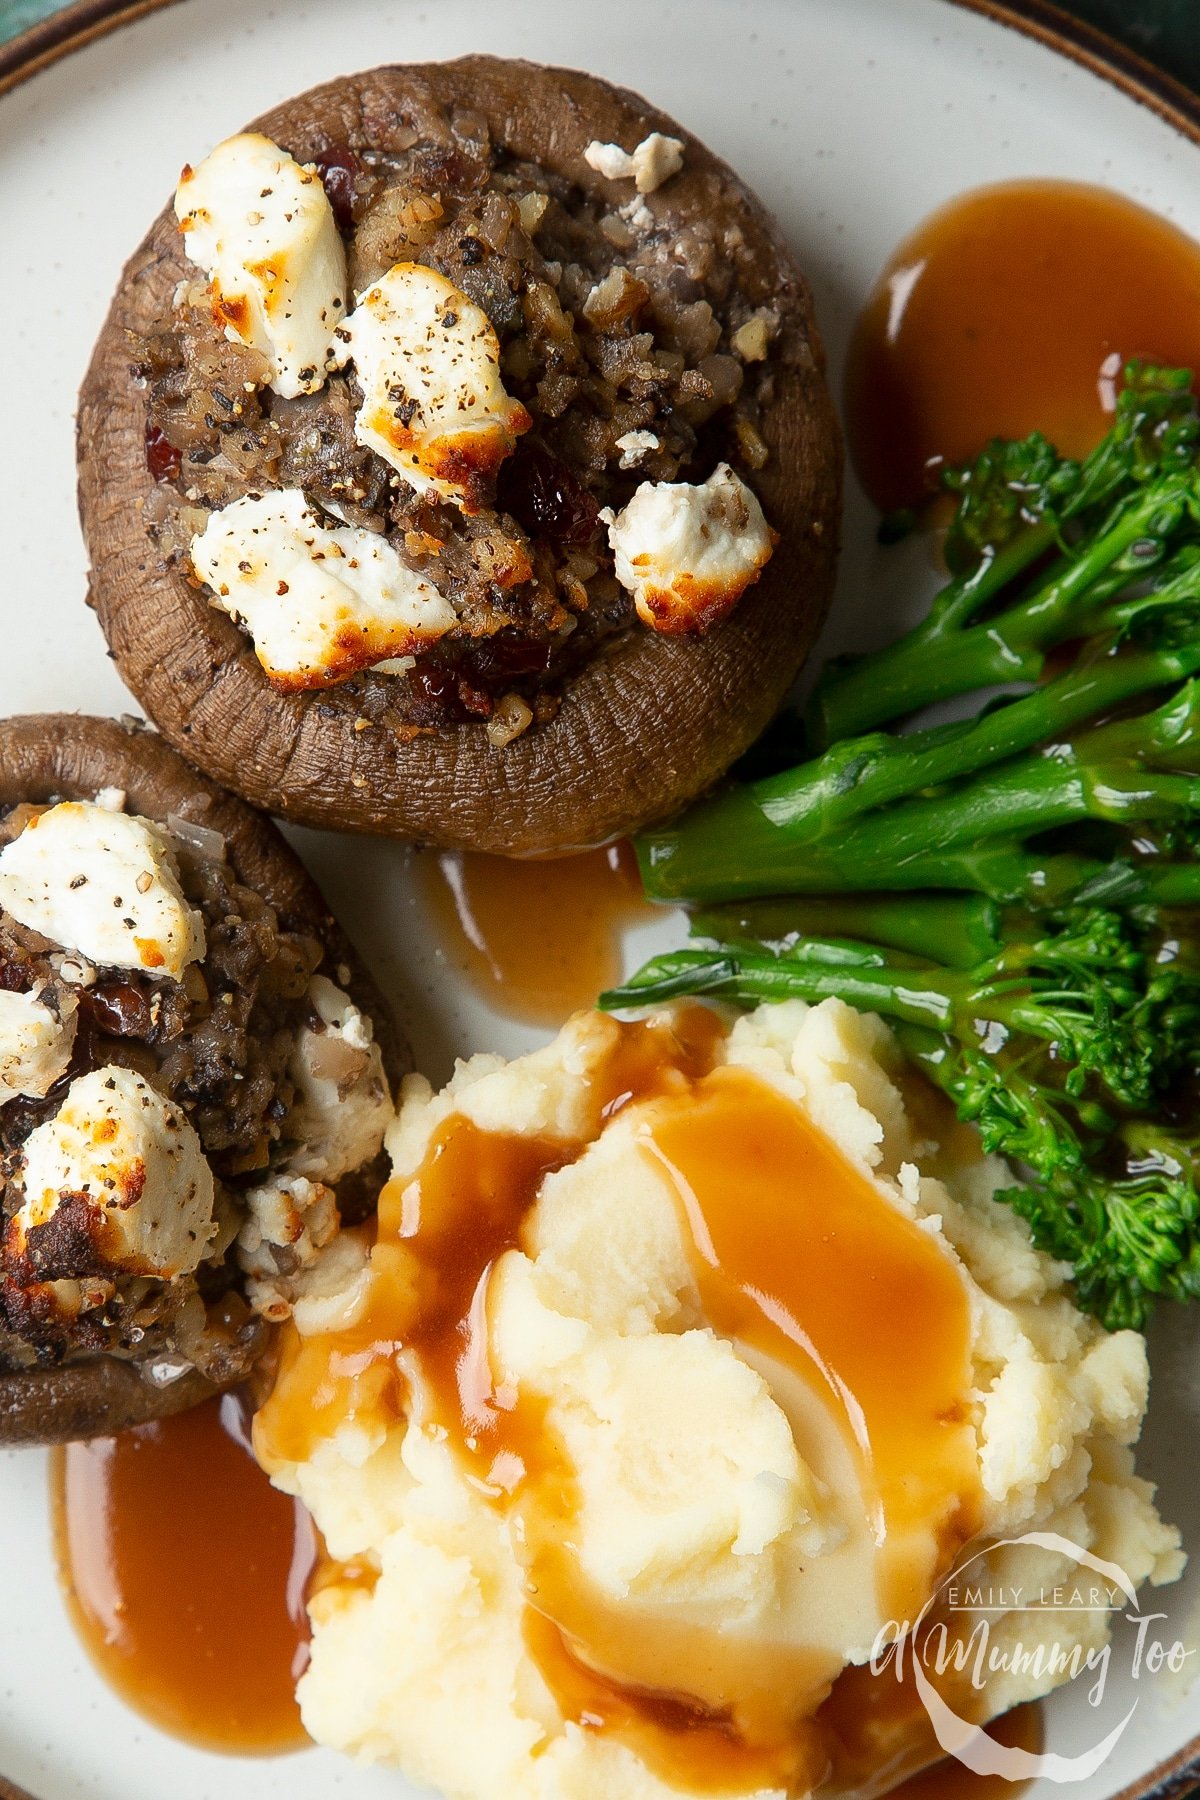 Overhead shot of a Festive Christmas stuffed mushroom with mashed potato and cauliflower on the side served on a white plate with a mummy too logo in the lower-right corner